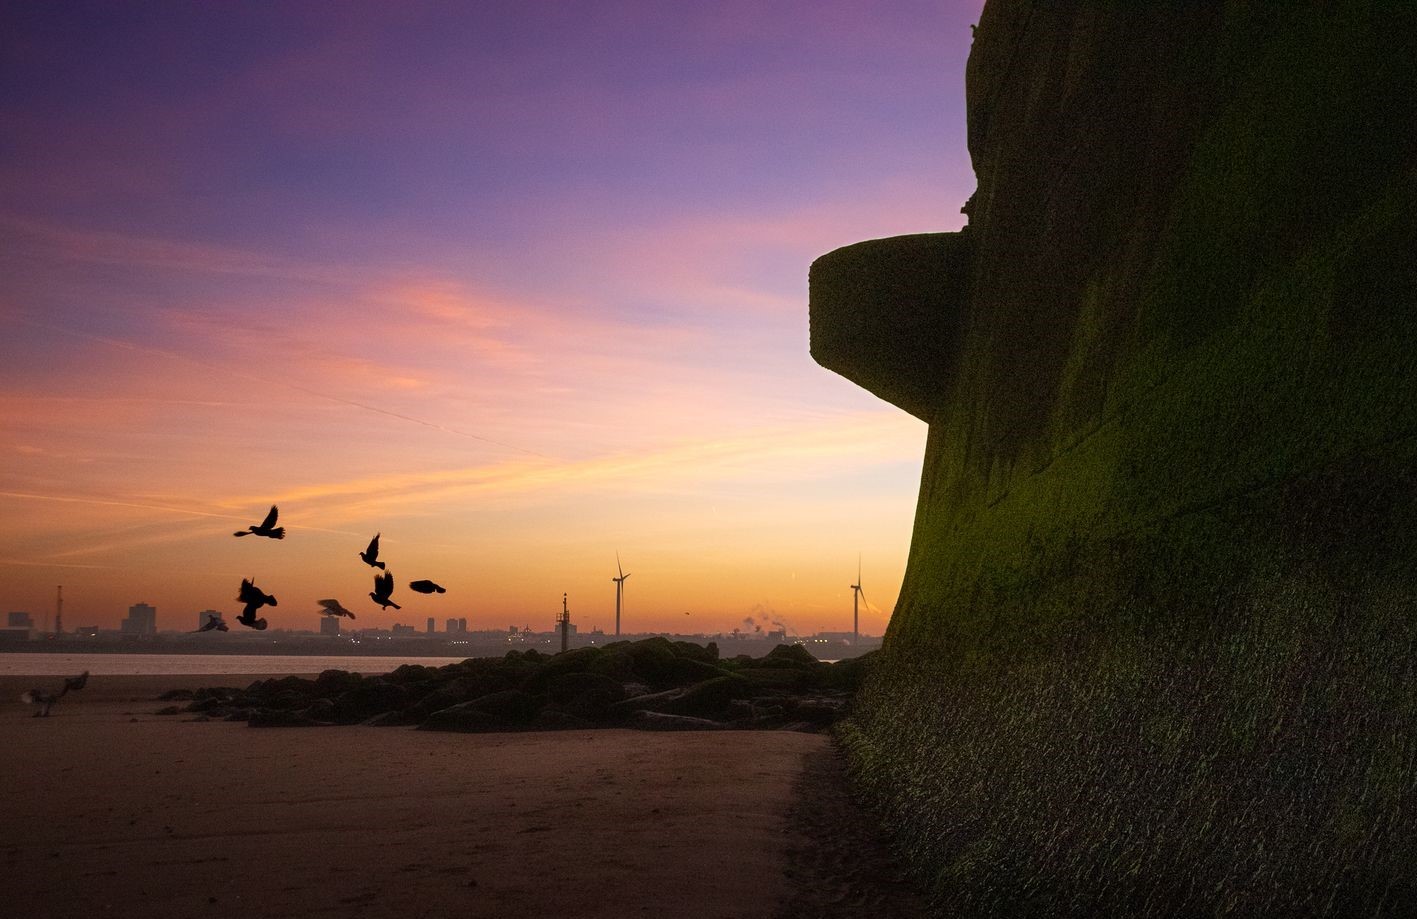 Behind Fort Perch Rock at sunrise by Tracey Rennie